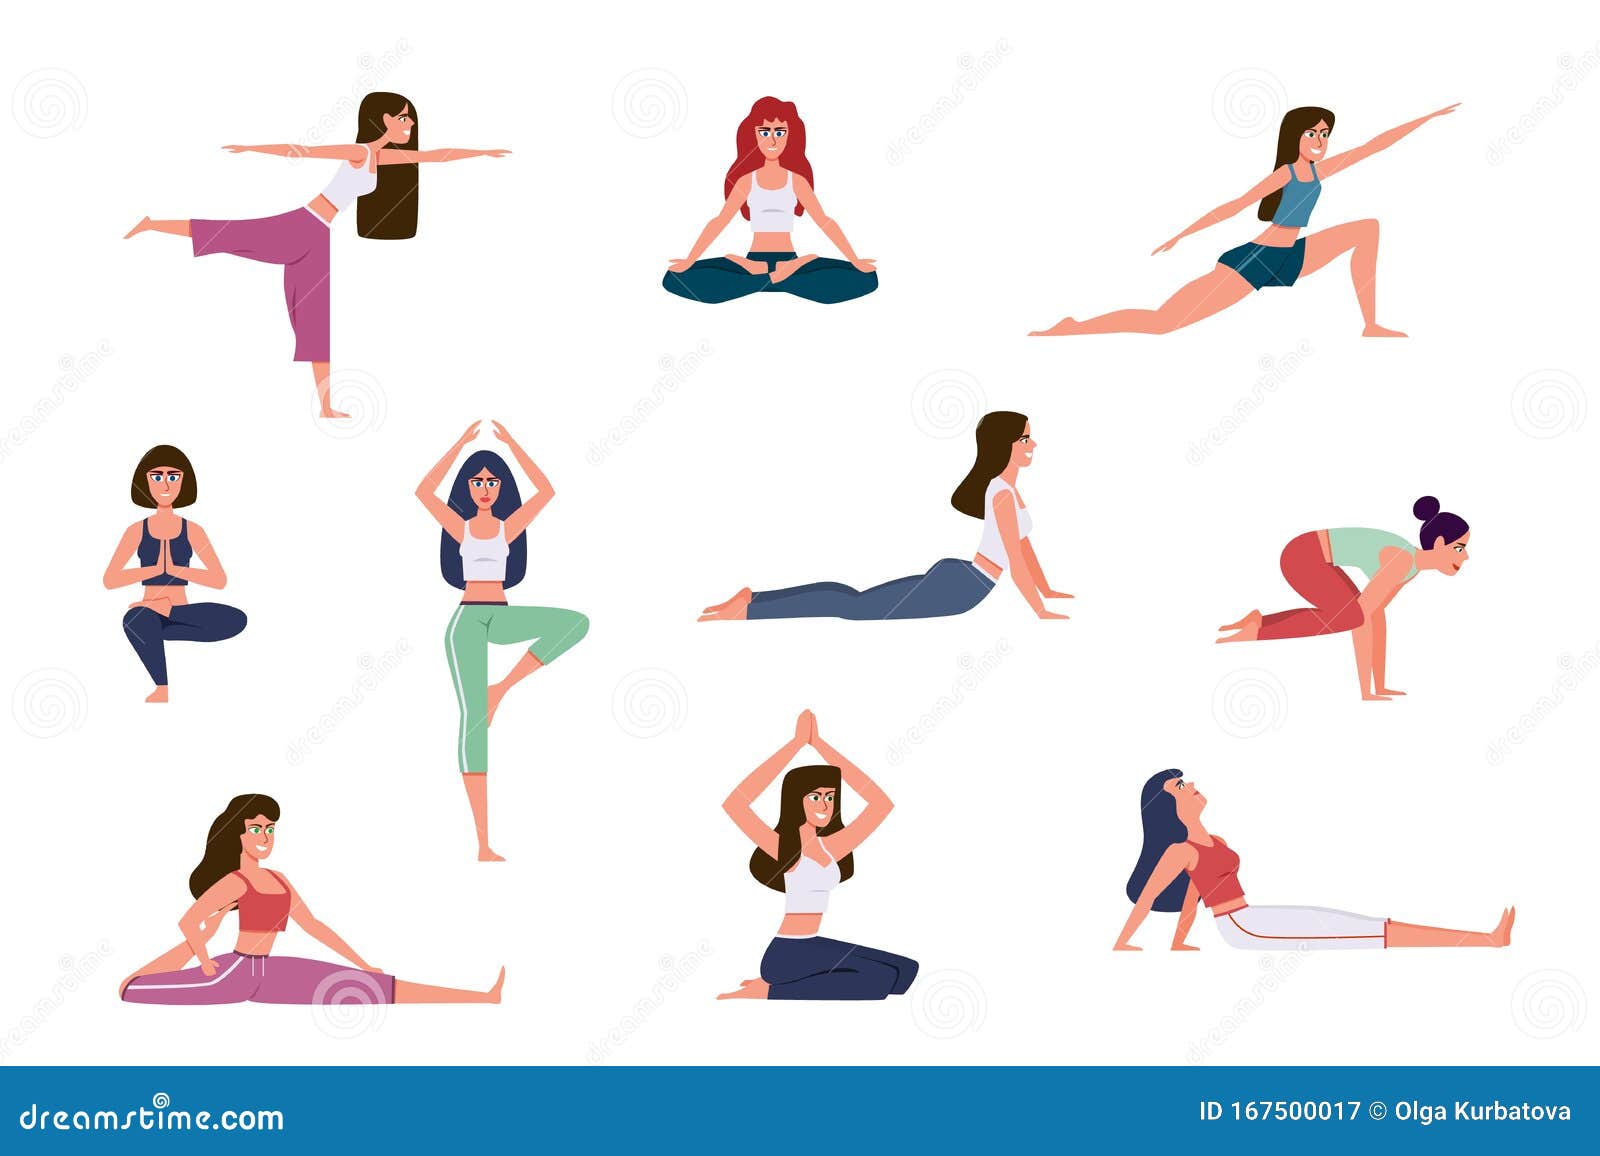 Yoga Poses - Song Download from Various Positions - Sitting Dog, Pain  Relief, Muscles, Warm-up, Body, Asan, Without Stress, Harmony @ JioSaavn